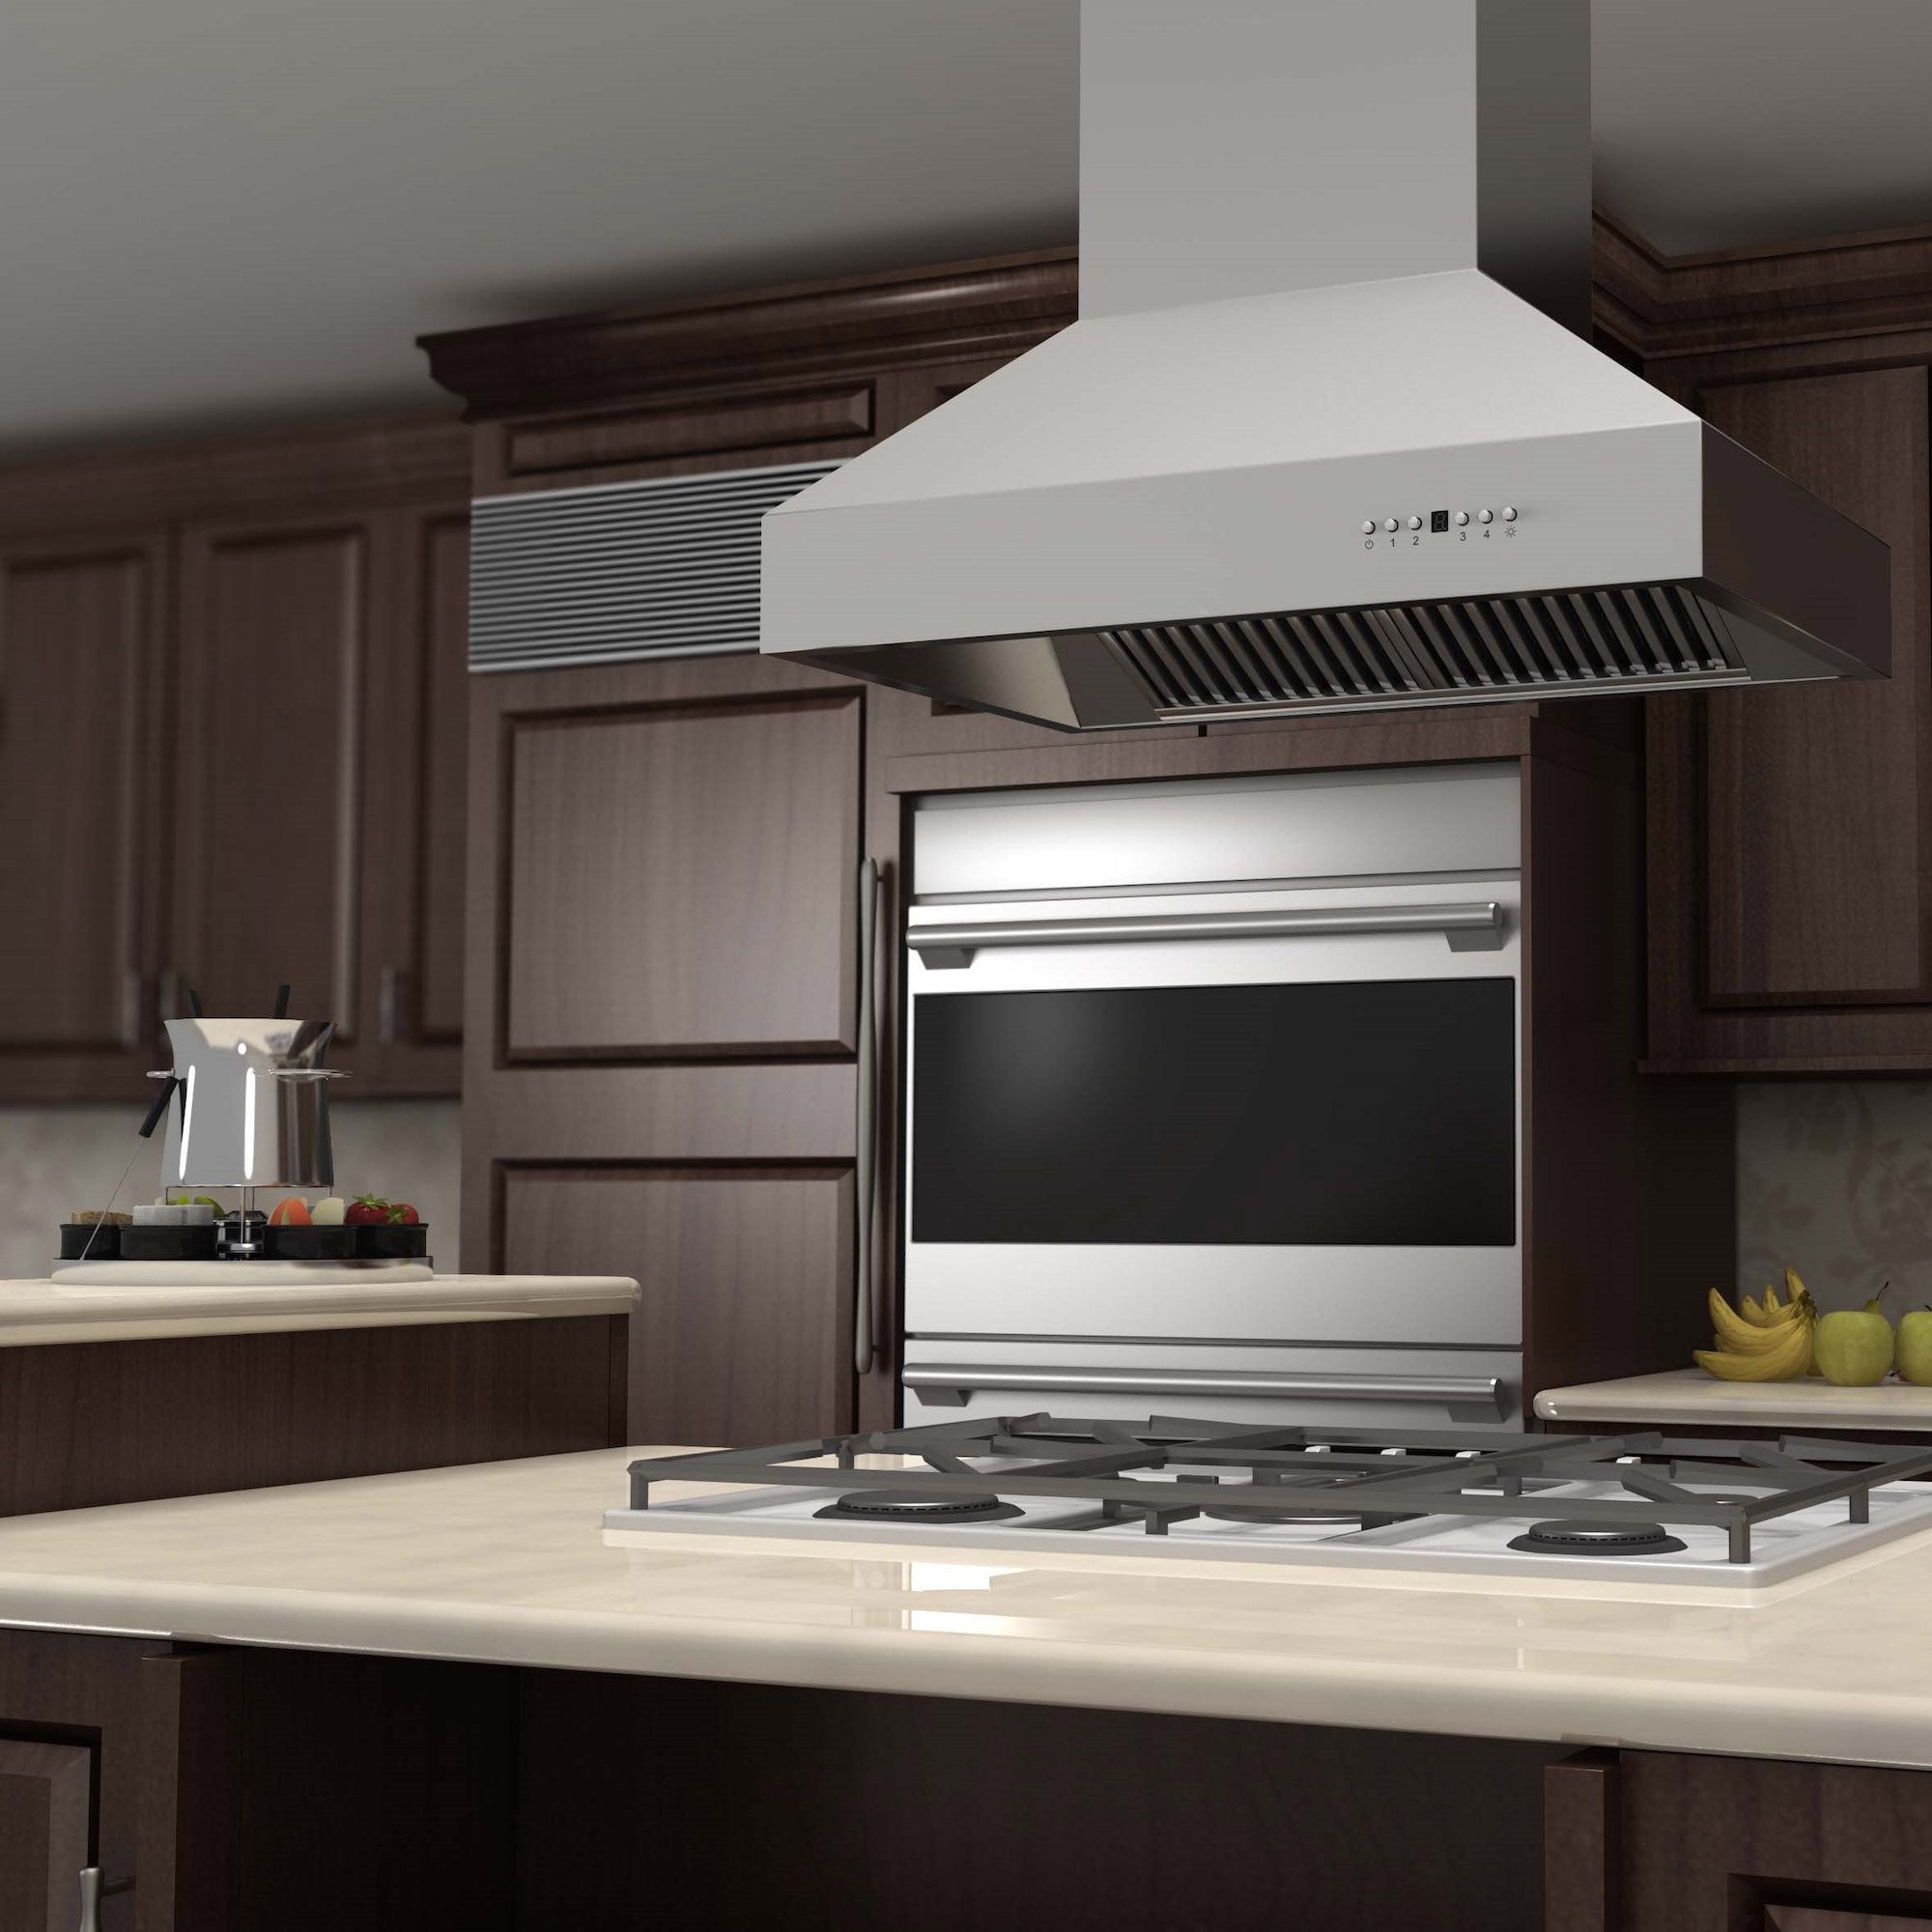 ZLINE Outdoor Approved Island Mount Range Hood in Stainless Steel (697i-304) rendering in a rustic kitchen.